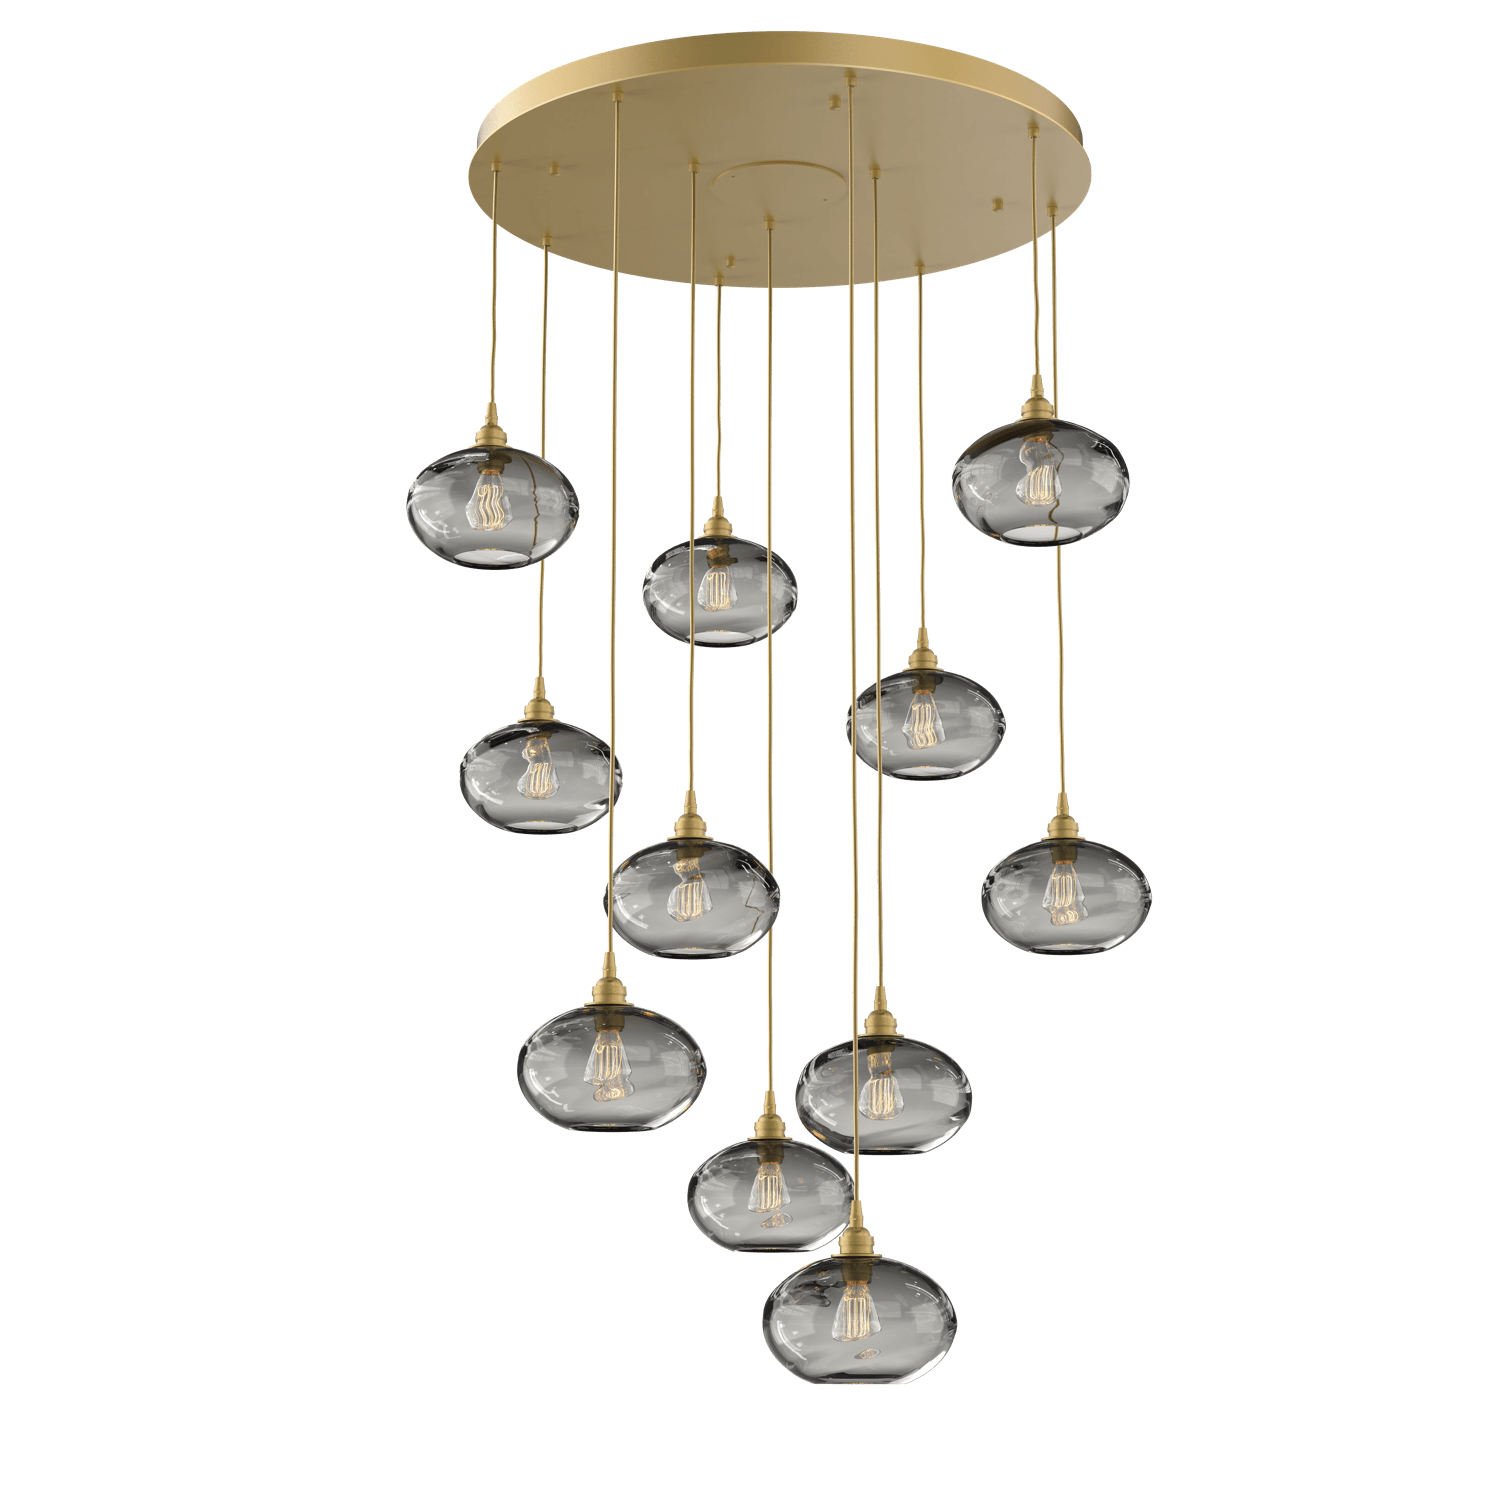 CHB0036-11-GB-OS-Hammerton-Studio-Optic-Blown-Glass-Coppa-11-light-round-pendant-chandelier-with-gilded-brass-finish-and-optic-smoke-blown-glass-shades-and-incandescent-lamping